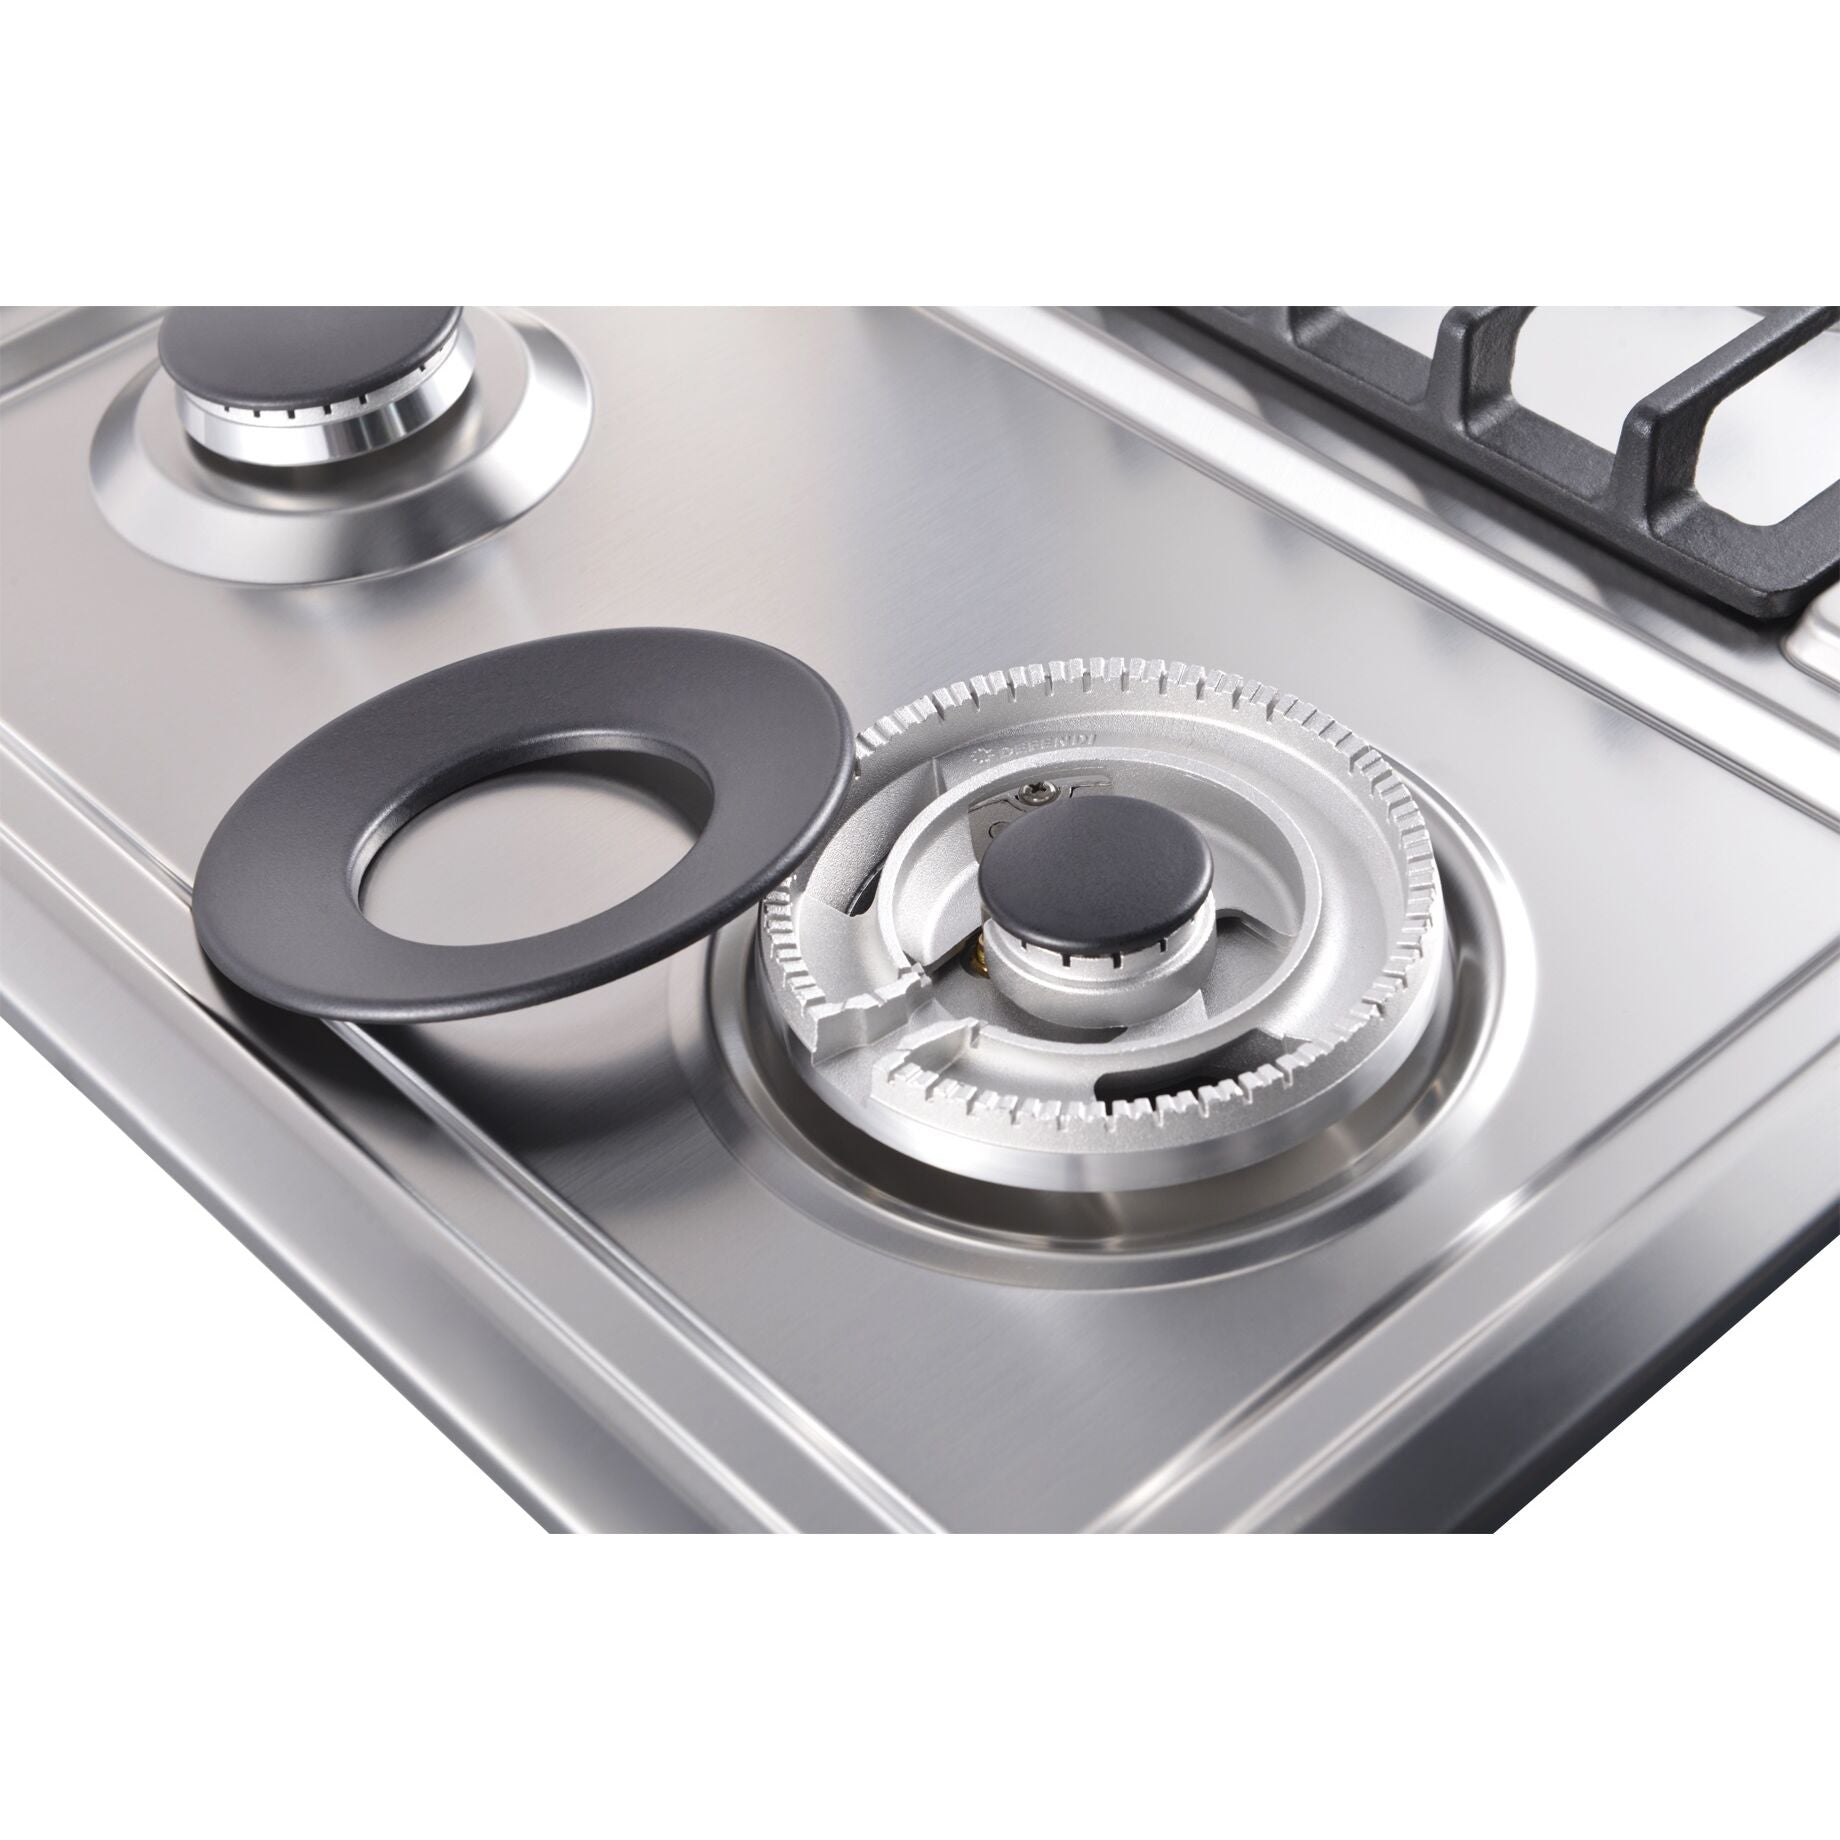 Galanz 24-In. Gas Cooktop in Stainless Steel with 15000 BTU Triple Ring Power Burner (GL1CT24AS4G)